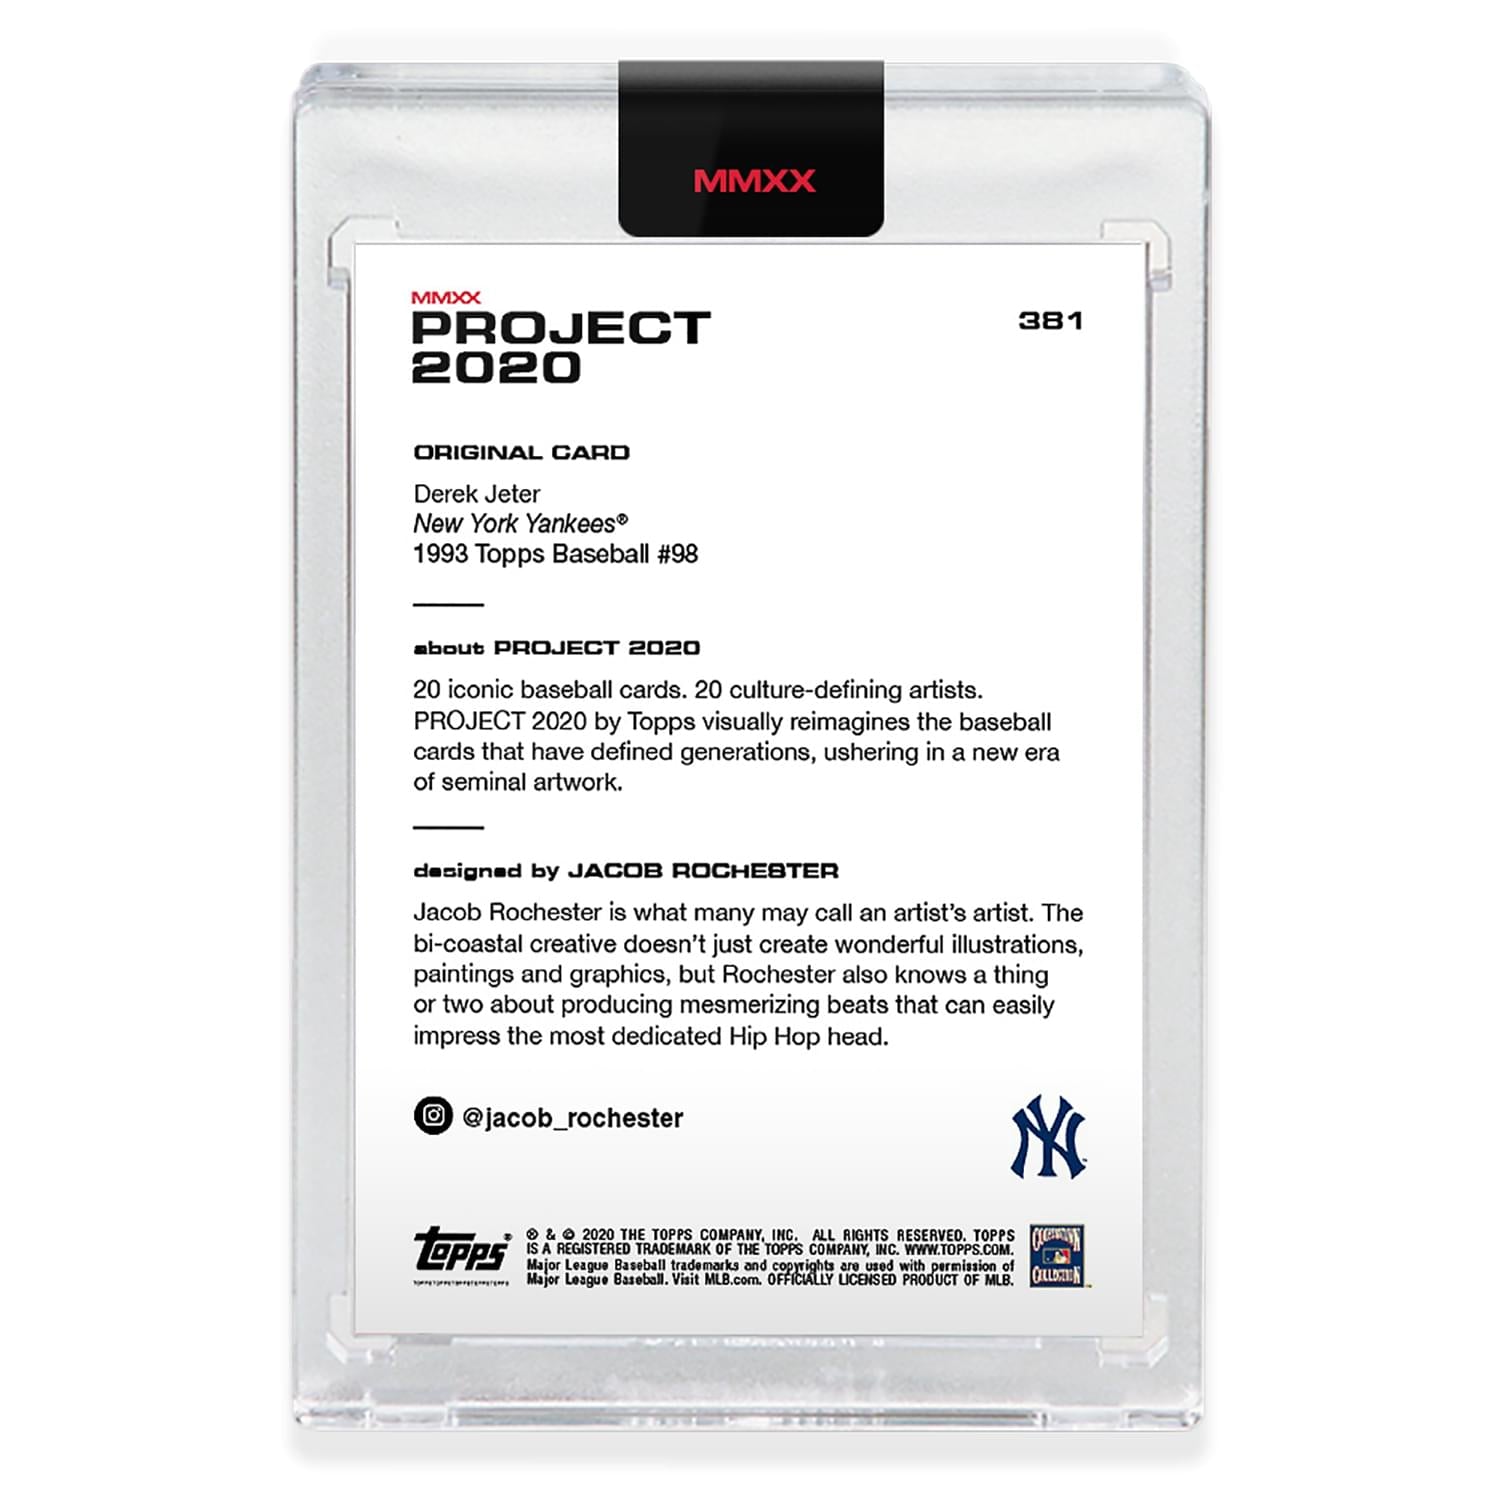 Topps PROJECT 2020 Card 381 - 1993 Derek Jeter by Jacob Rochester